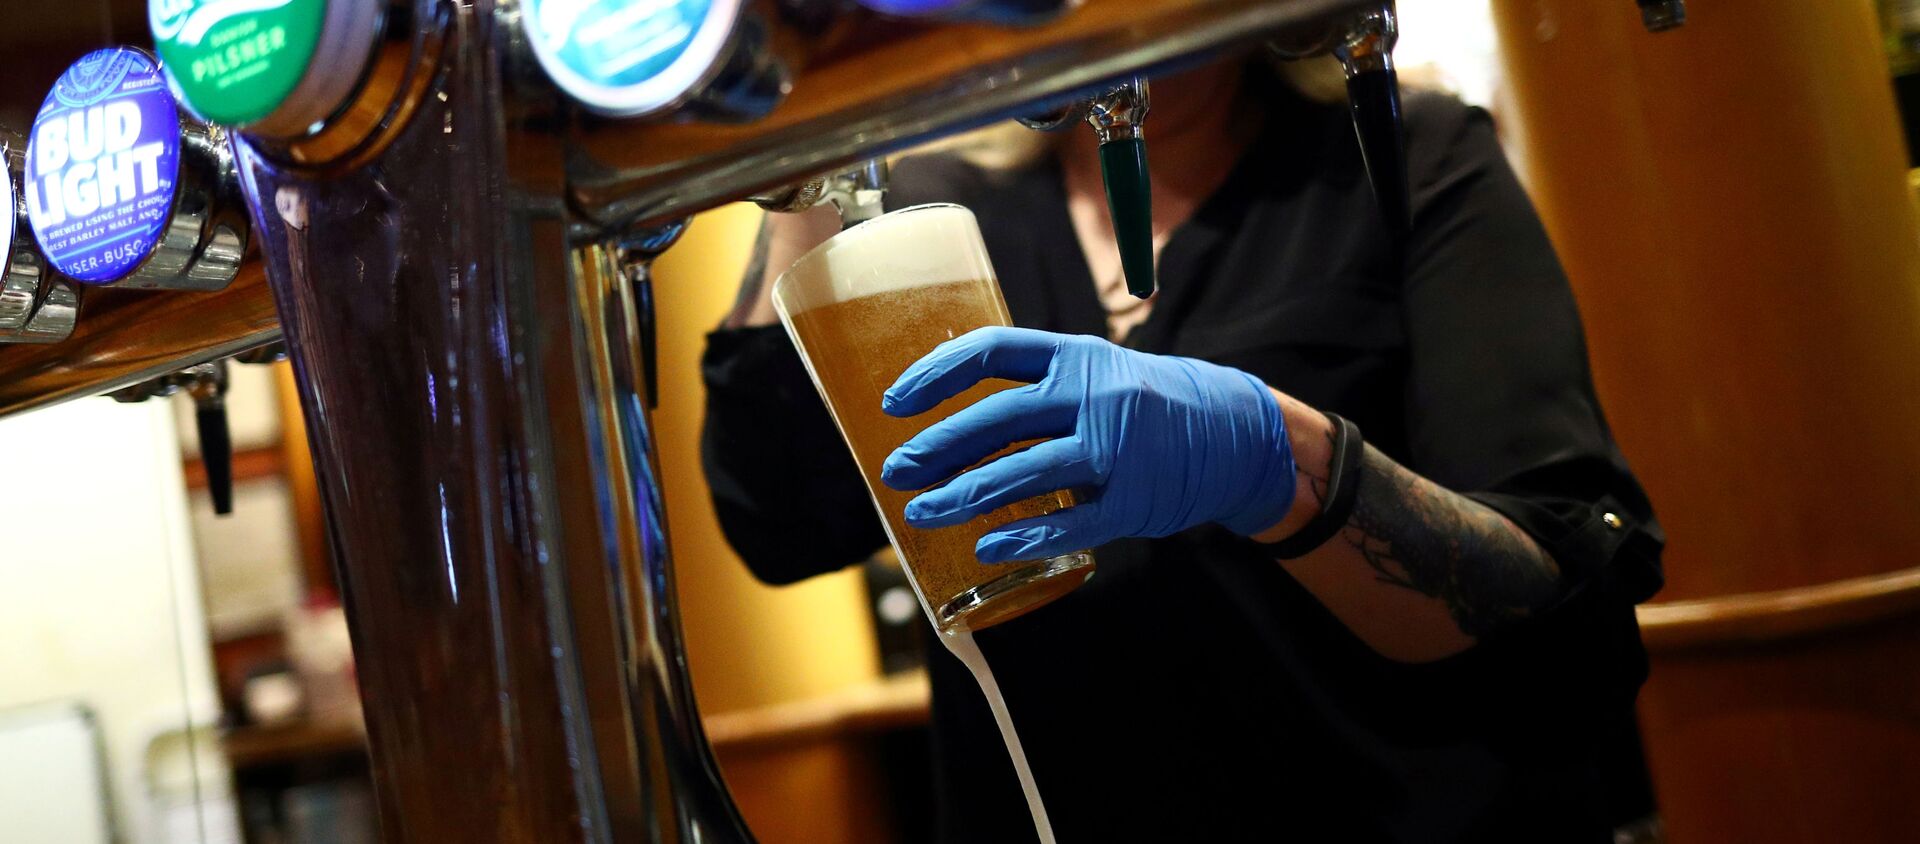 FILE PHOTO: A worker serves a beer at The Holland Tringham Wetherspoons pub after it reopened following the outbreak of the coronavirus disease (COVID-19), in London, Britain July 4, 2020 - Sputnik International, 1920, 22.01.2021